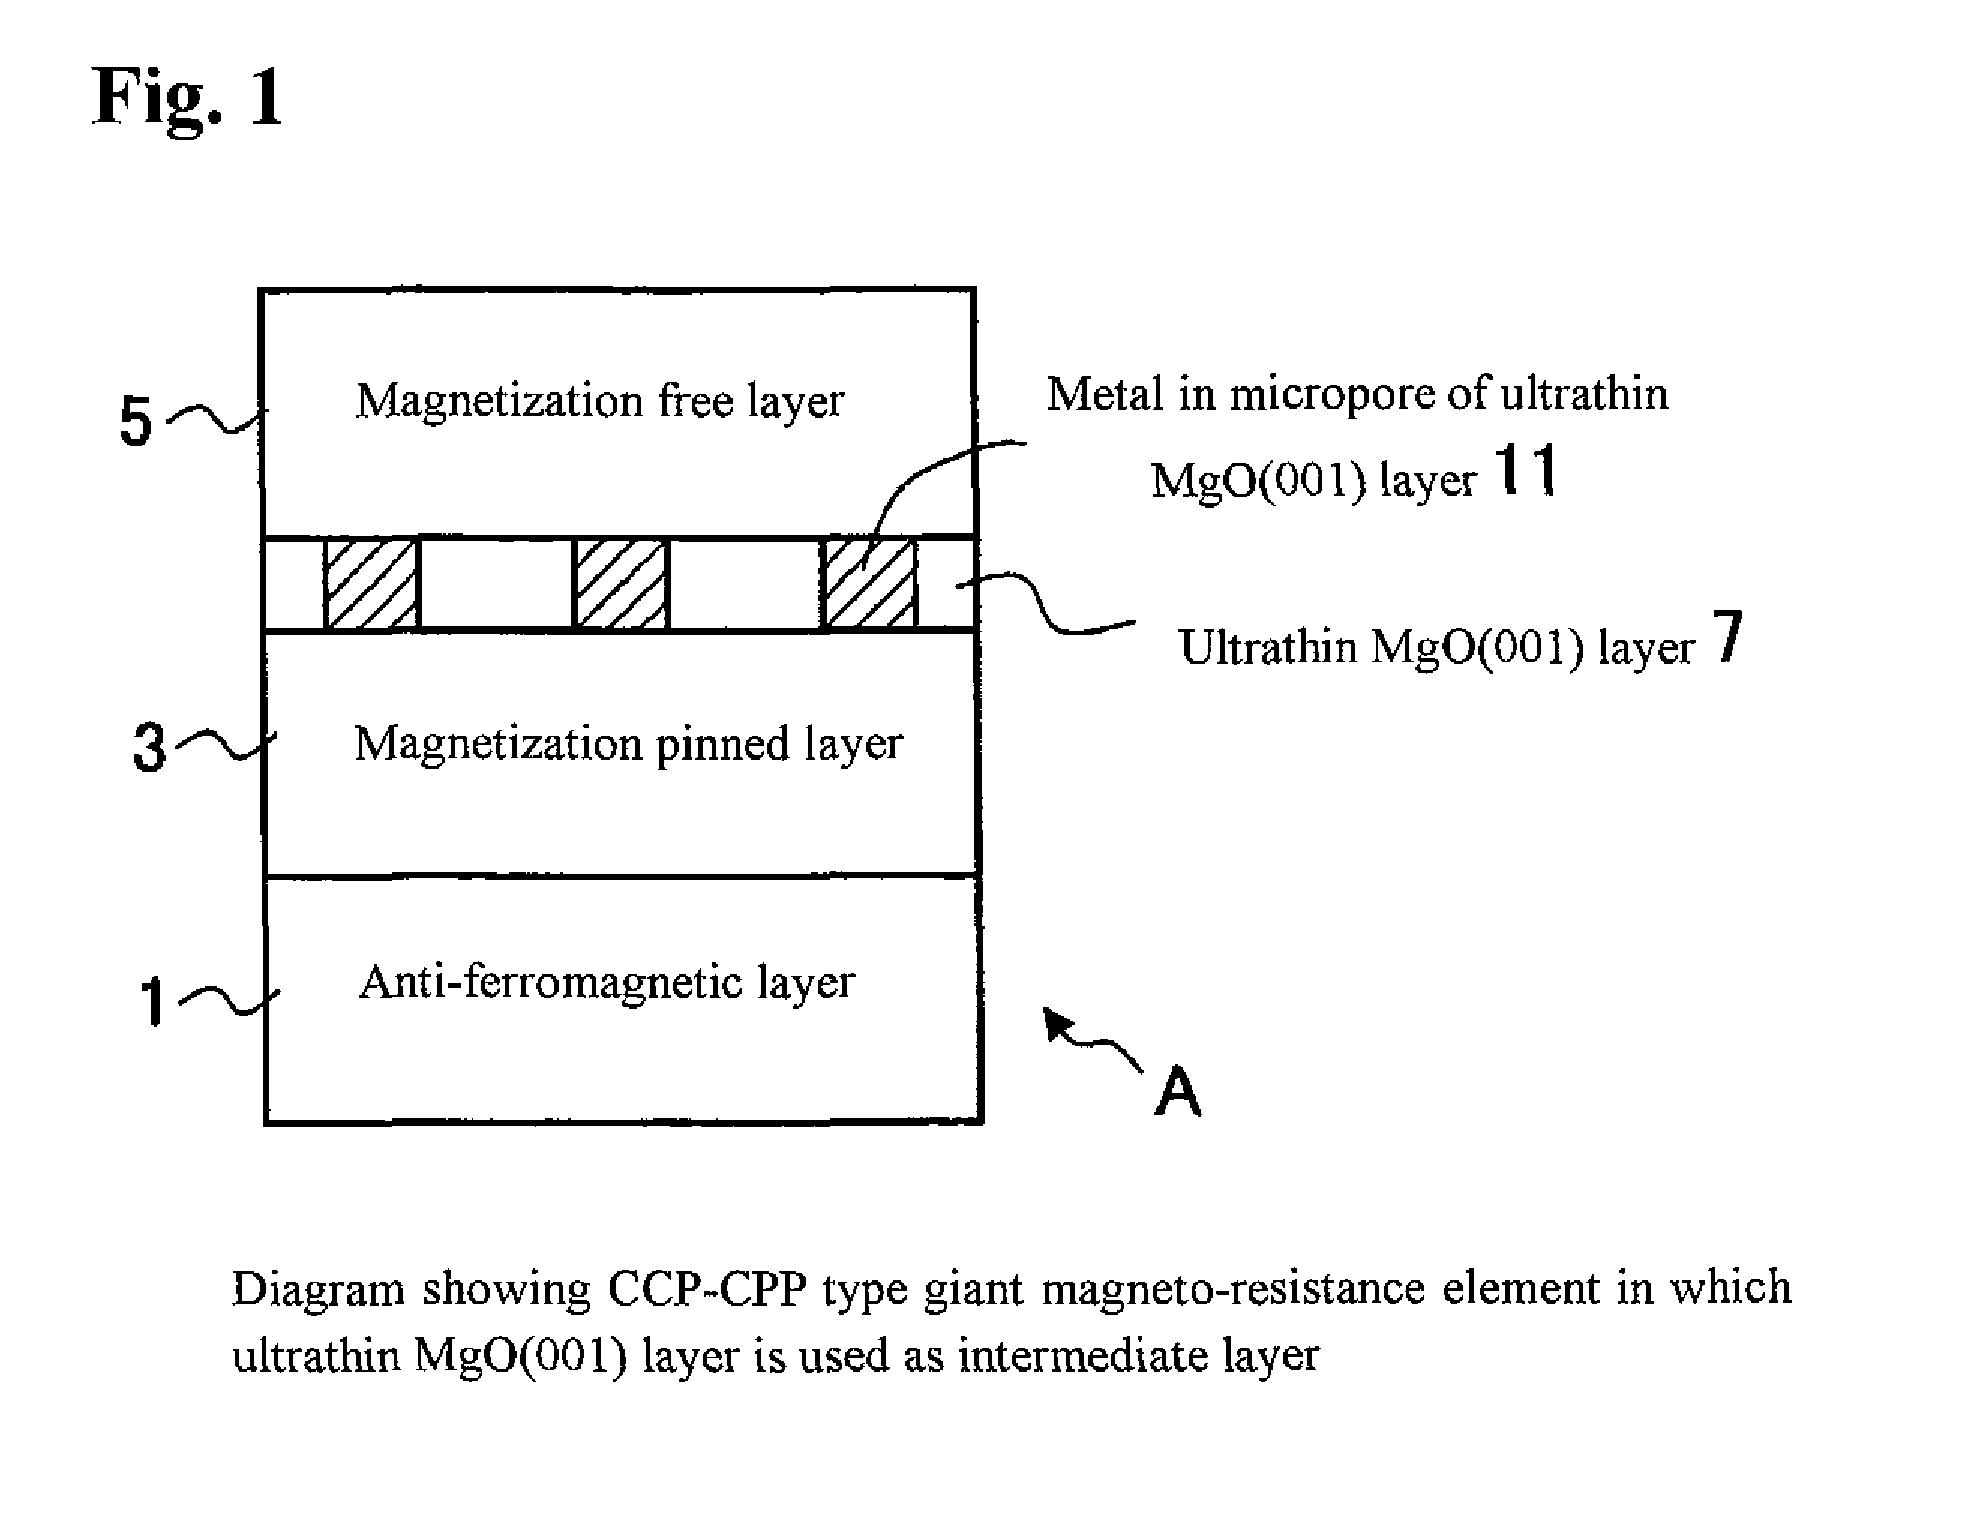 Cpp type giant magneto-resistance element and magnetic sensor